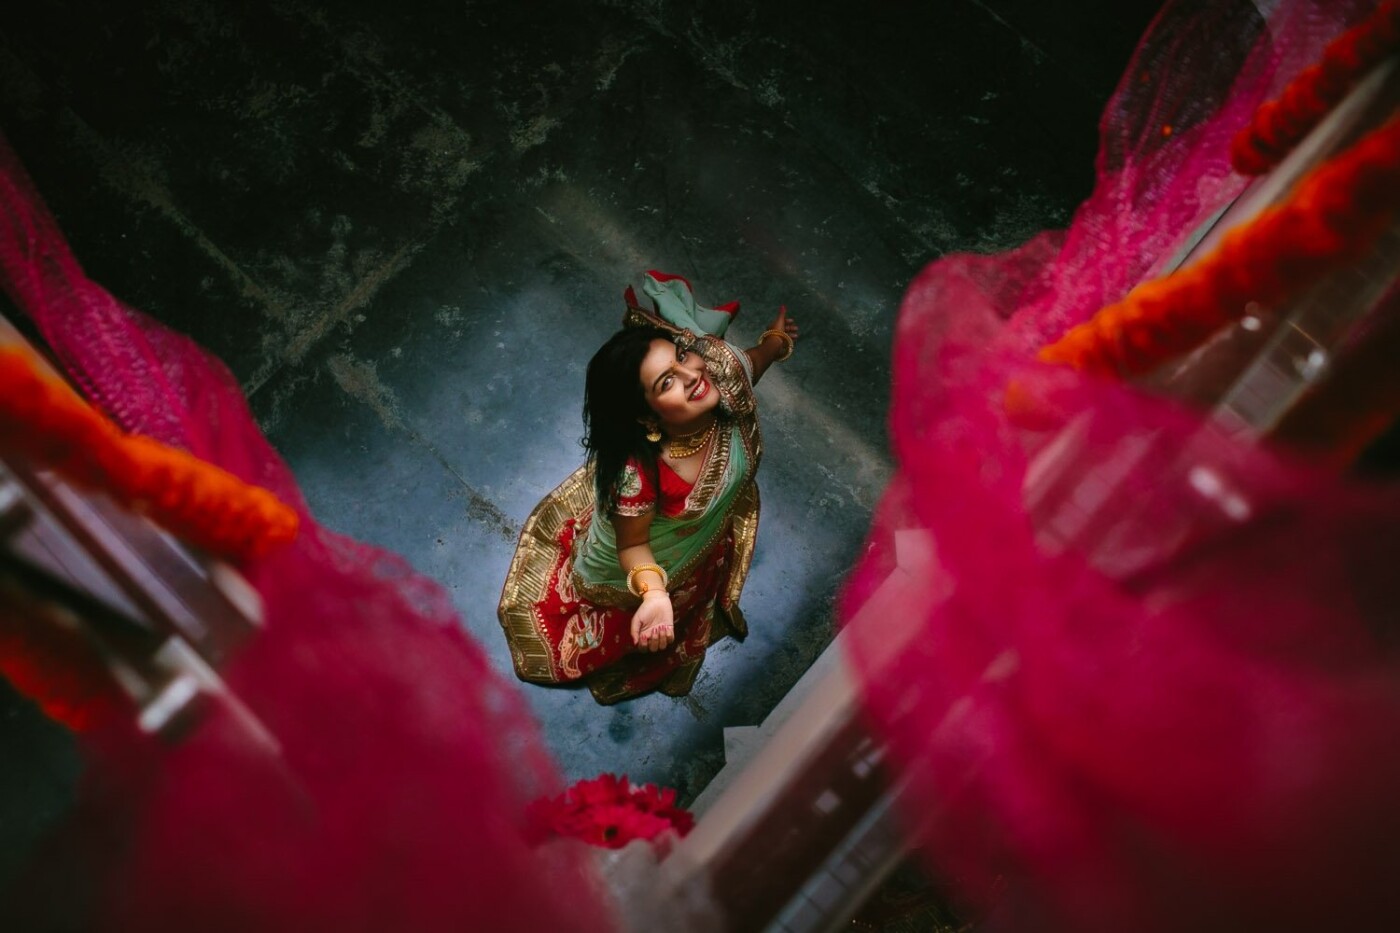 Anisha had a beautiful and colorful Indian wedding in Raipur. I wanted to capture her personality and the colors and energy of the place so I asked her to dance in rounds and have fun. This photo was captured from the 1st floor of her beautiful house, before going to the first celebration of the week.